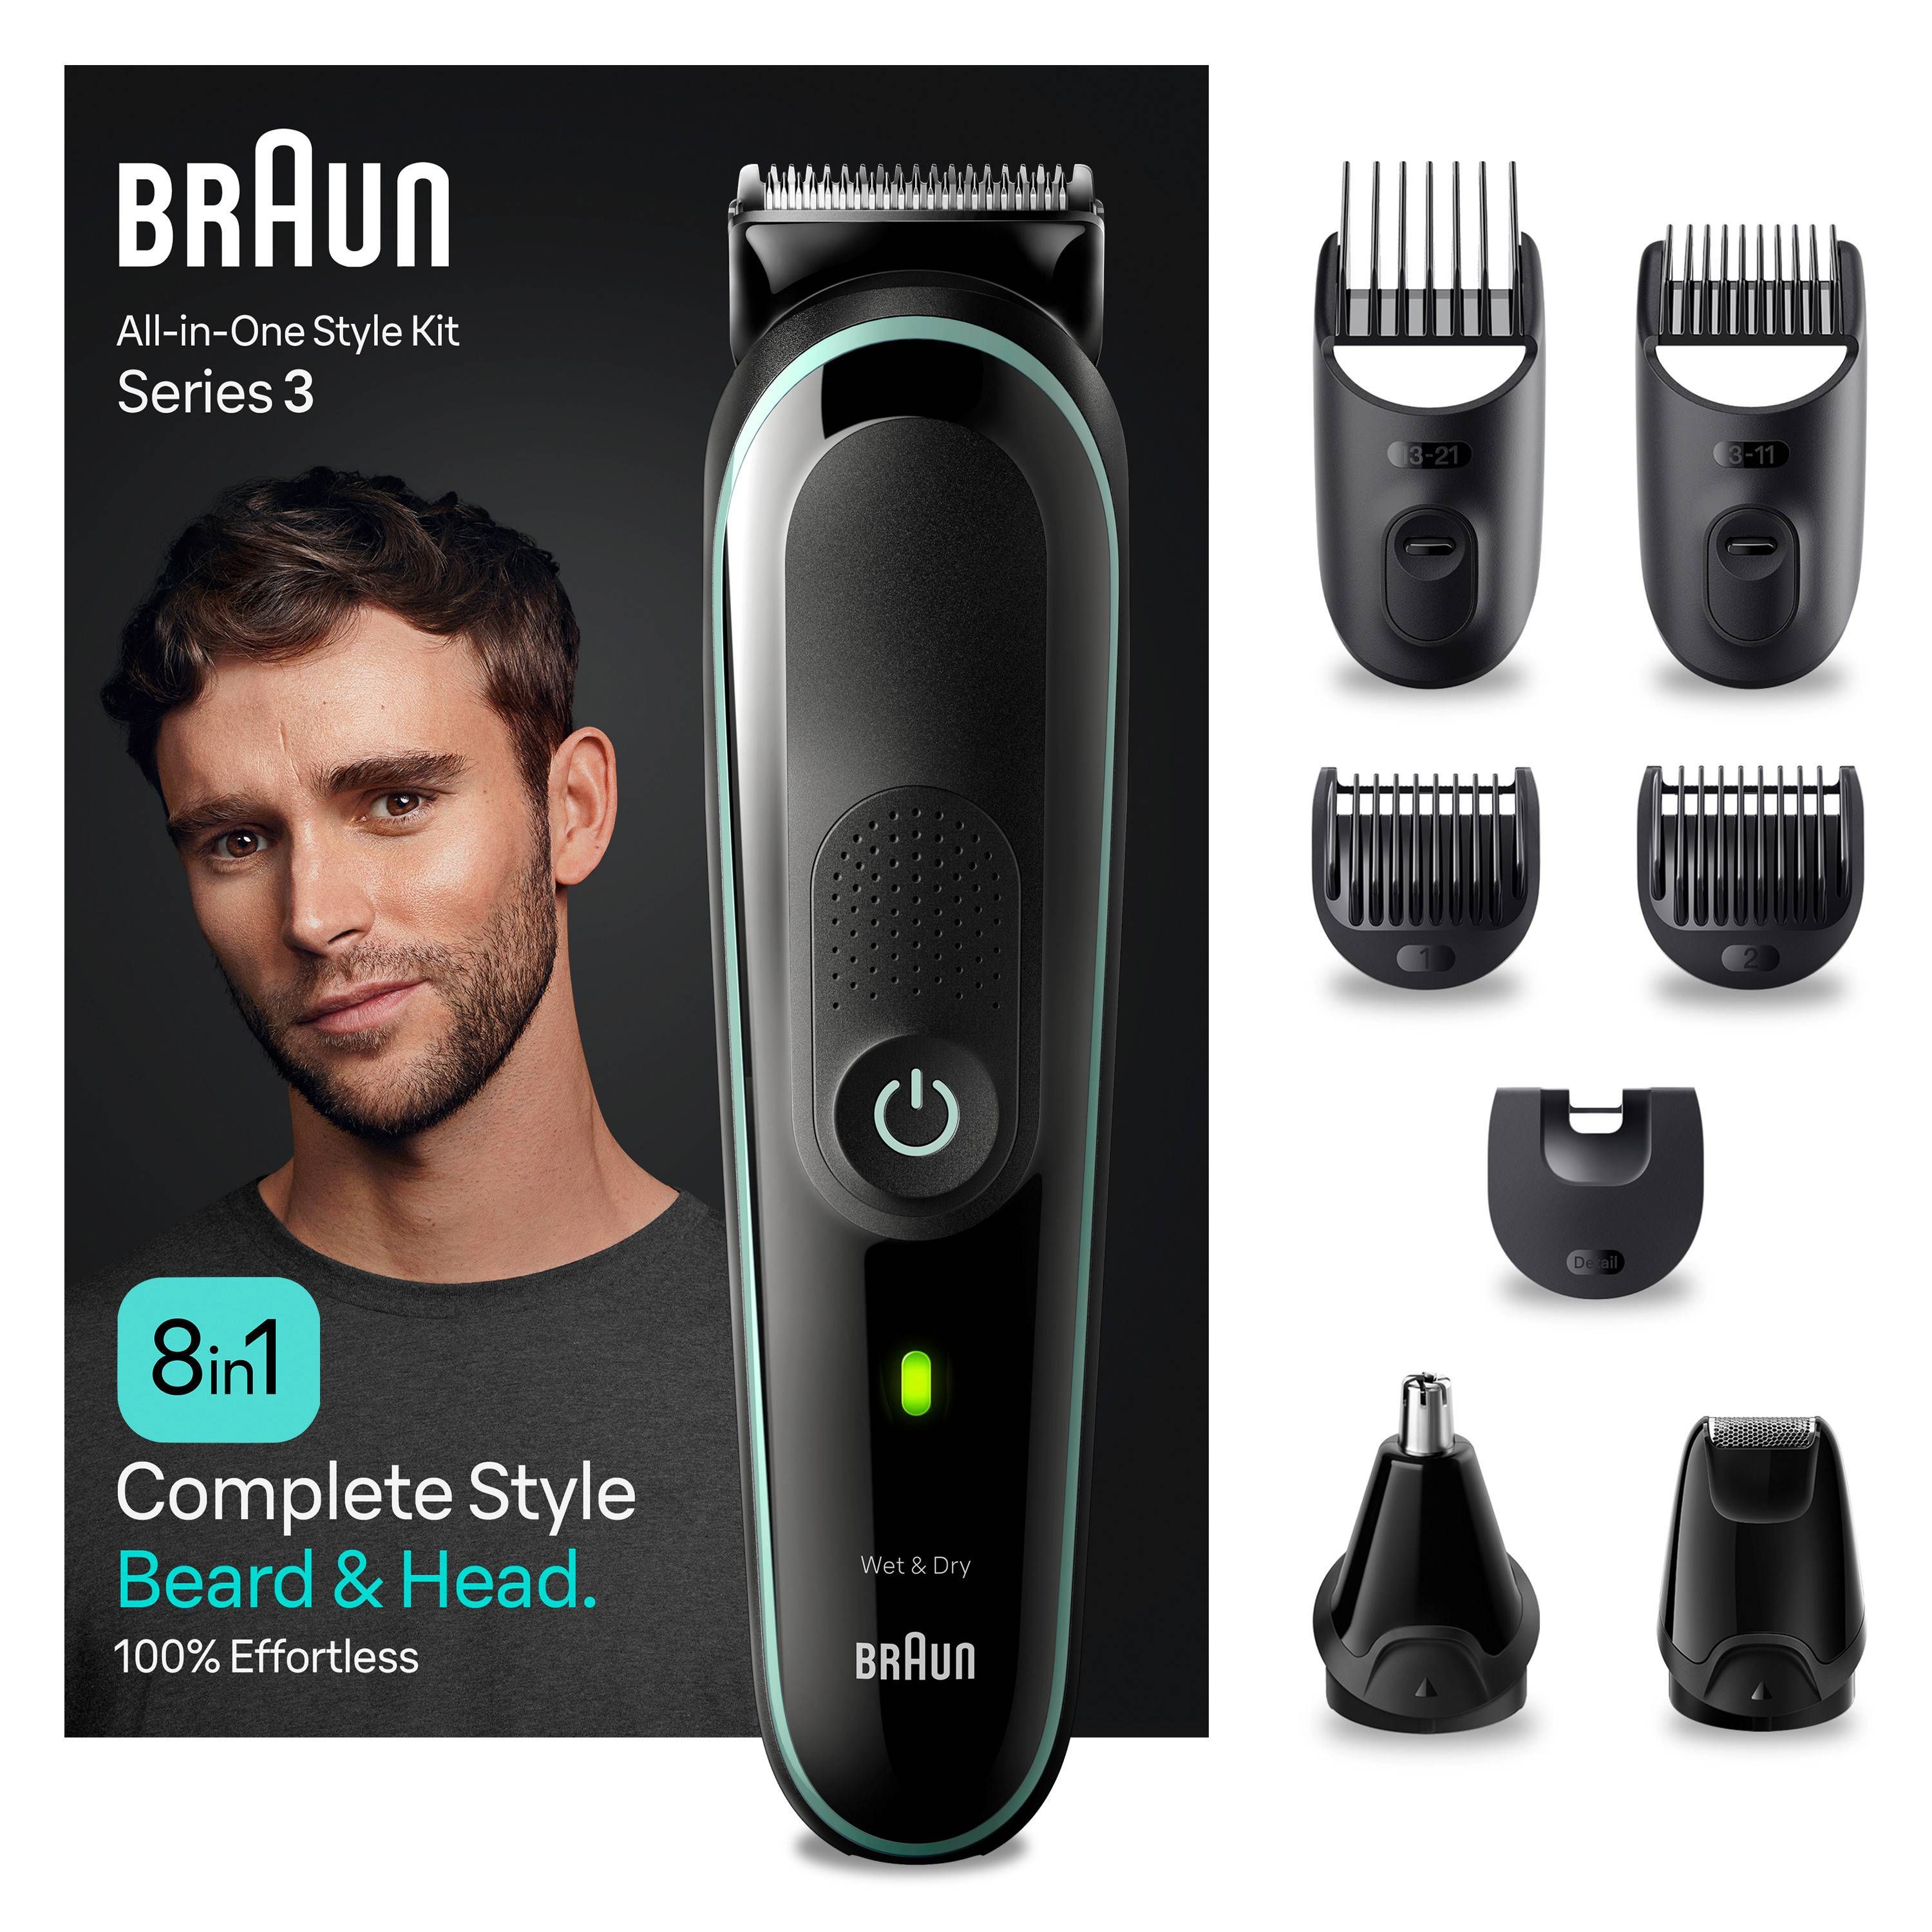 Braun All-in-One Style 656656680 MGK7450 Kit 